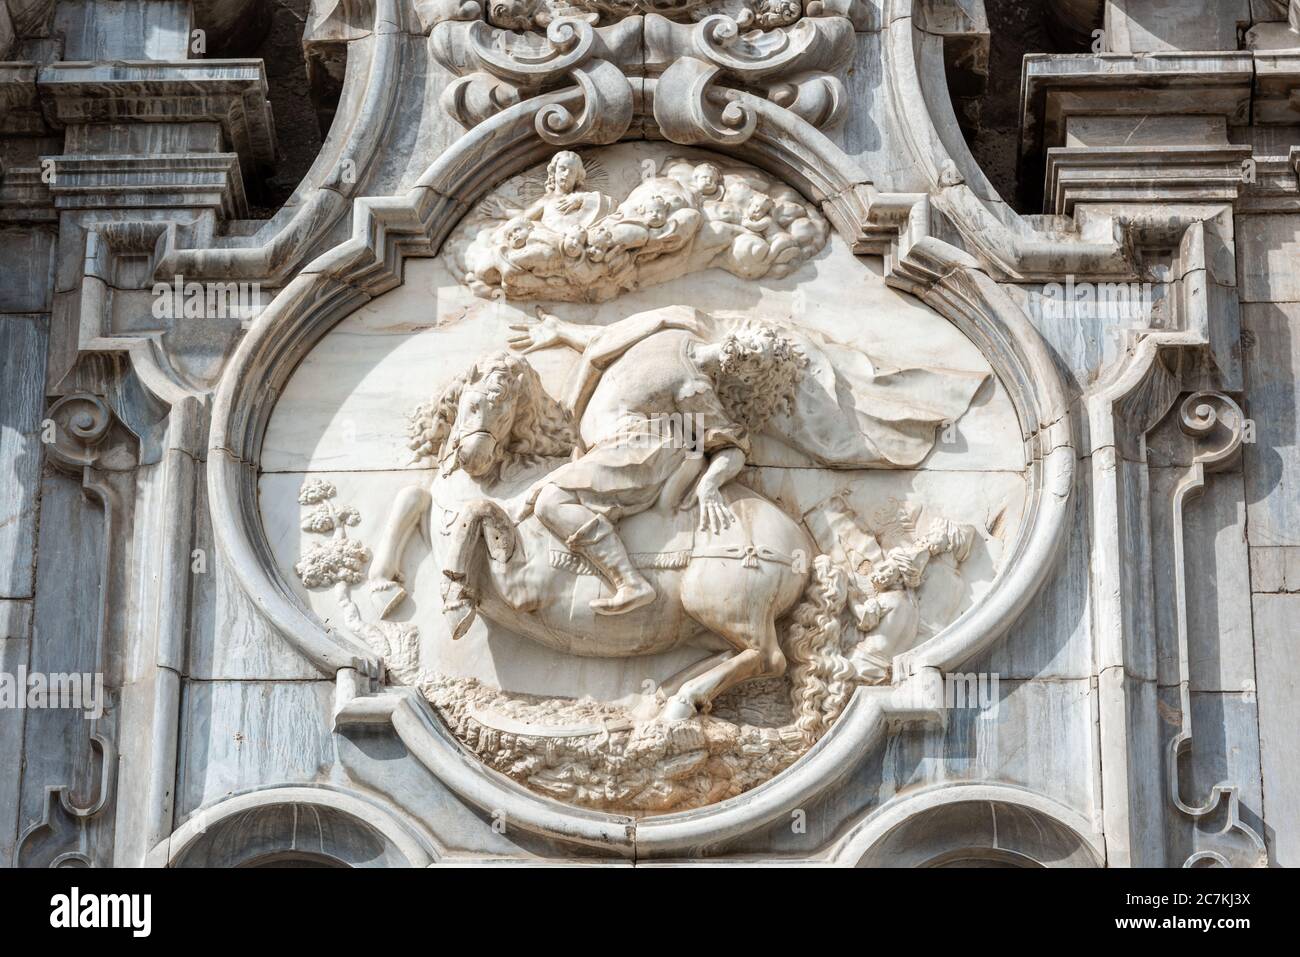 An equestrian relief above the entrance to the 16th century Iglesia de San Justo y Pastor in Granada depicts the conversion of Saint Paul. Stock Photo